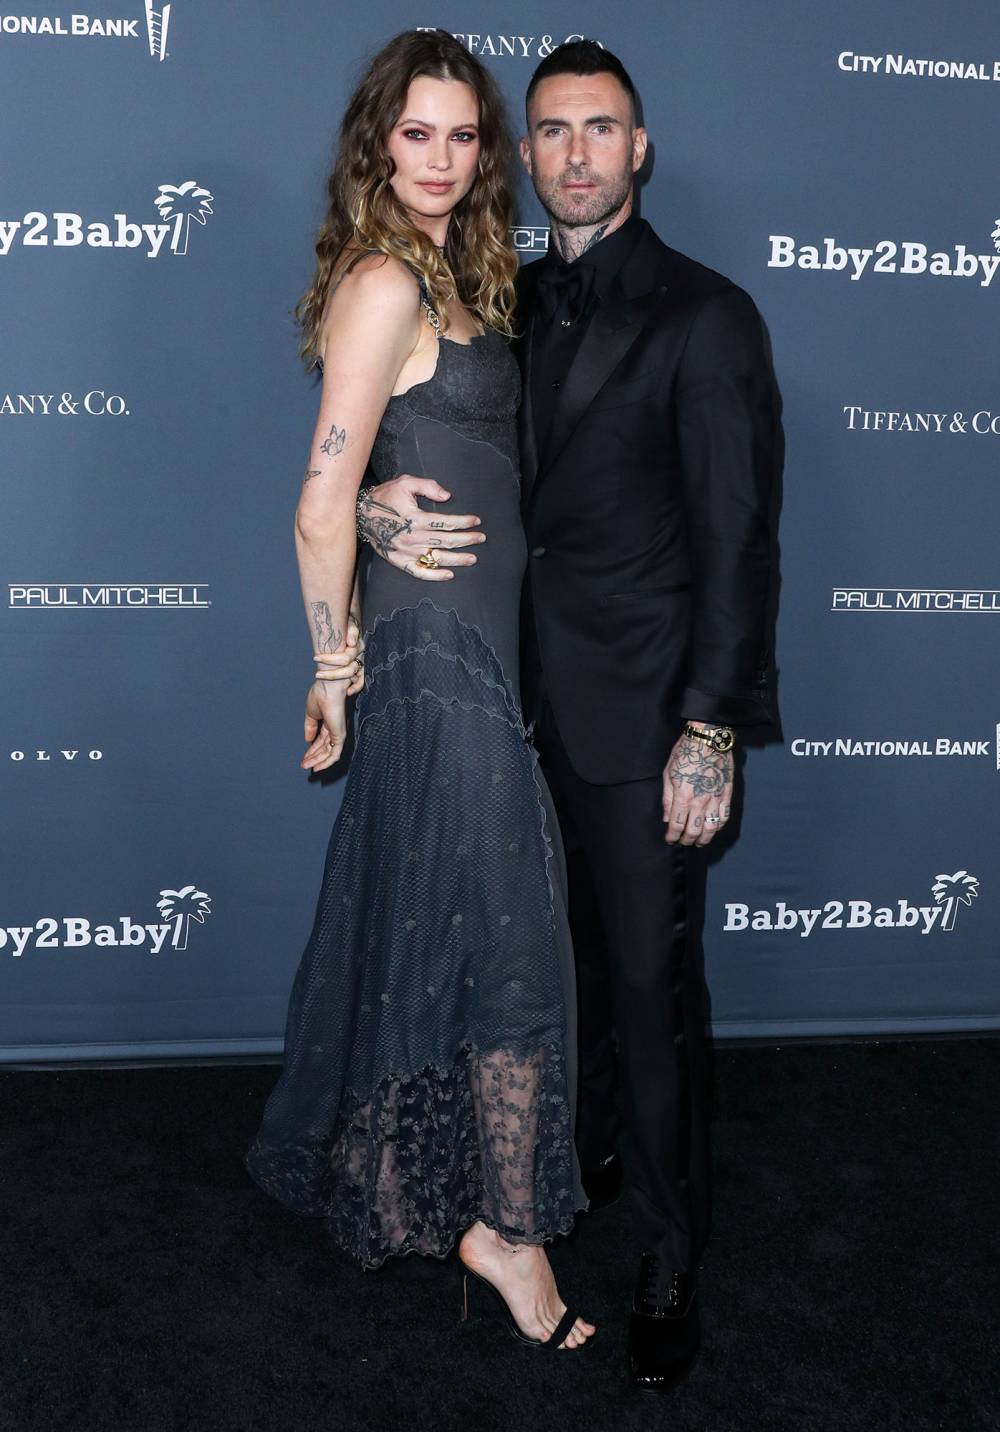 Behati Prinsloo Shares Sweet New Photo of Her Daughter Following Adam Levine Cheating Scandal